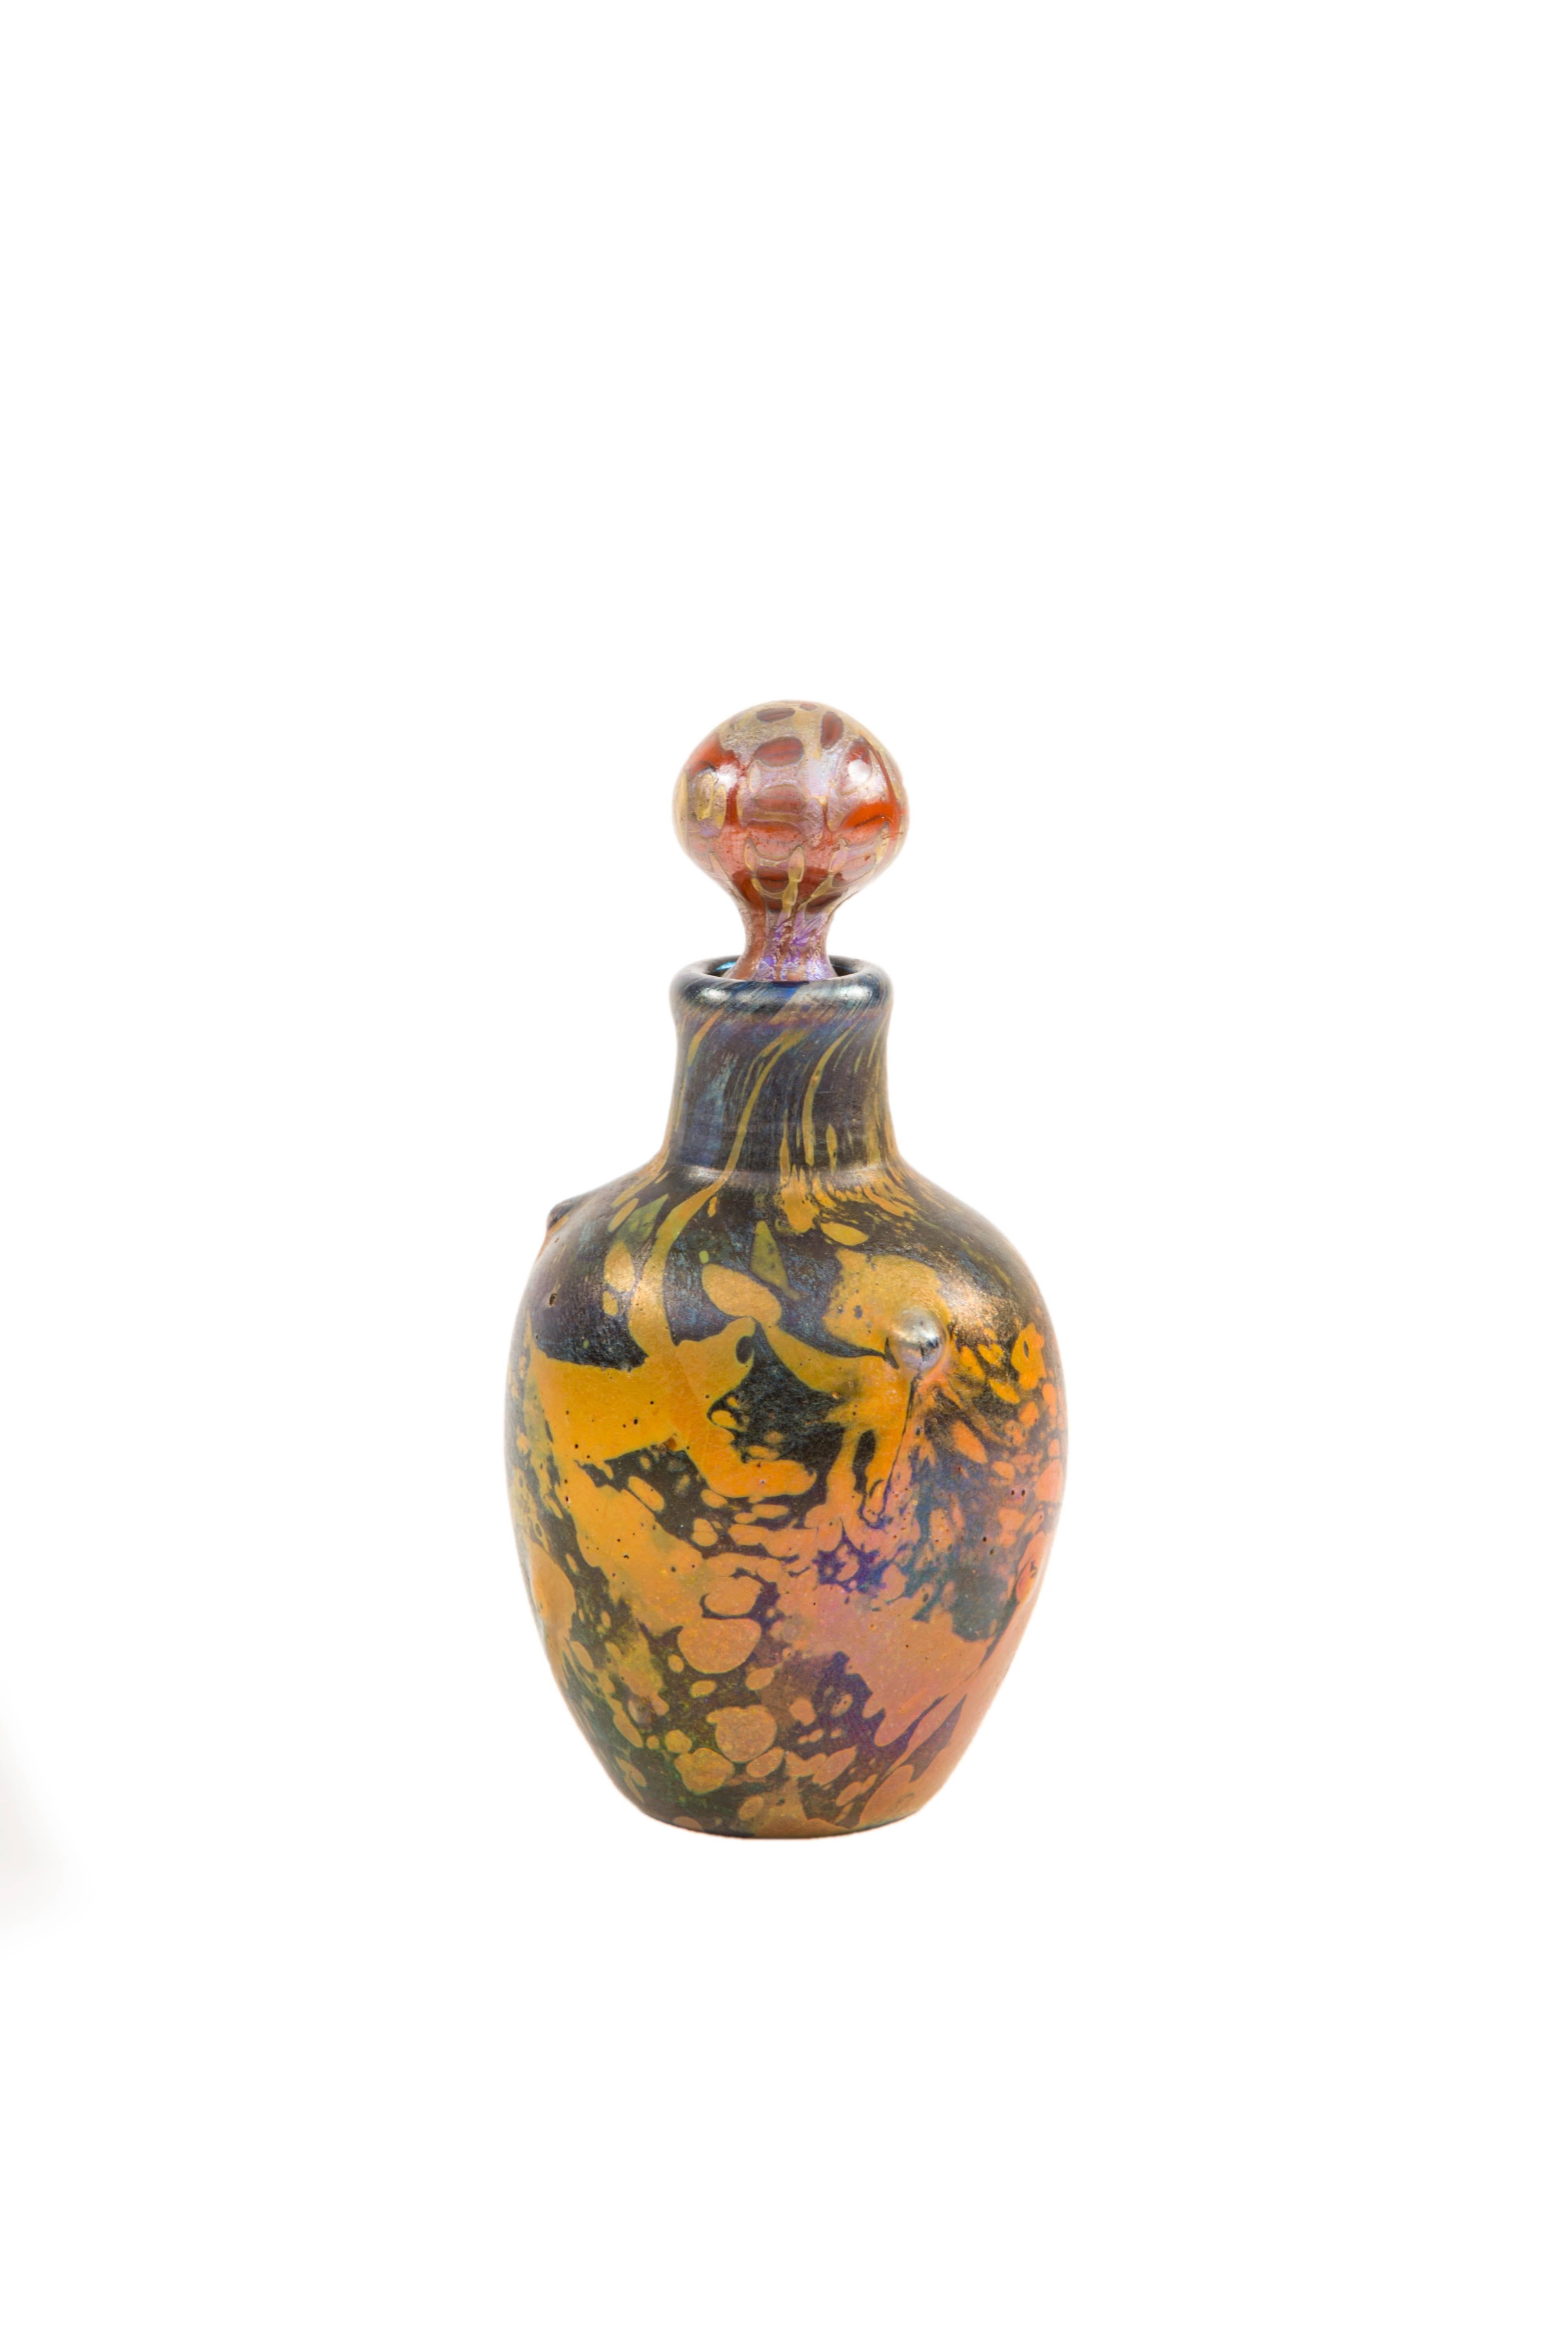 Tiffany Favrile Cypriote Decorated Perfume Bottle by, Tiffany Studios In Excellent Condition In Englewood, NJ